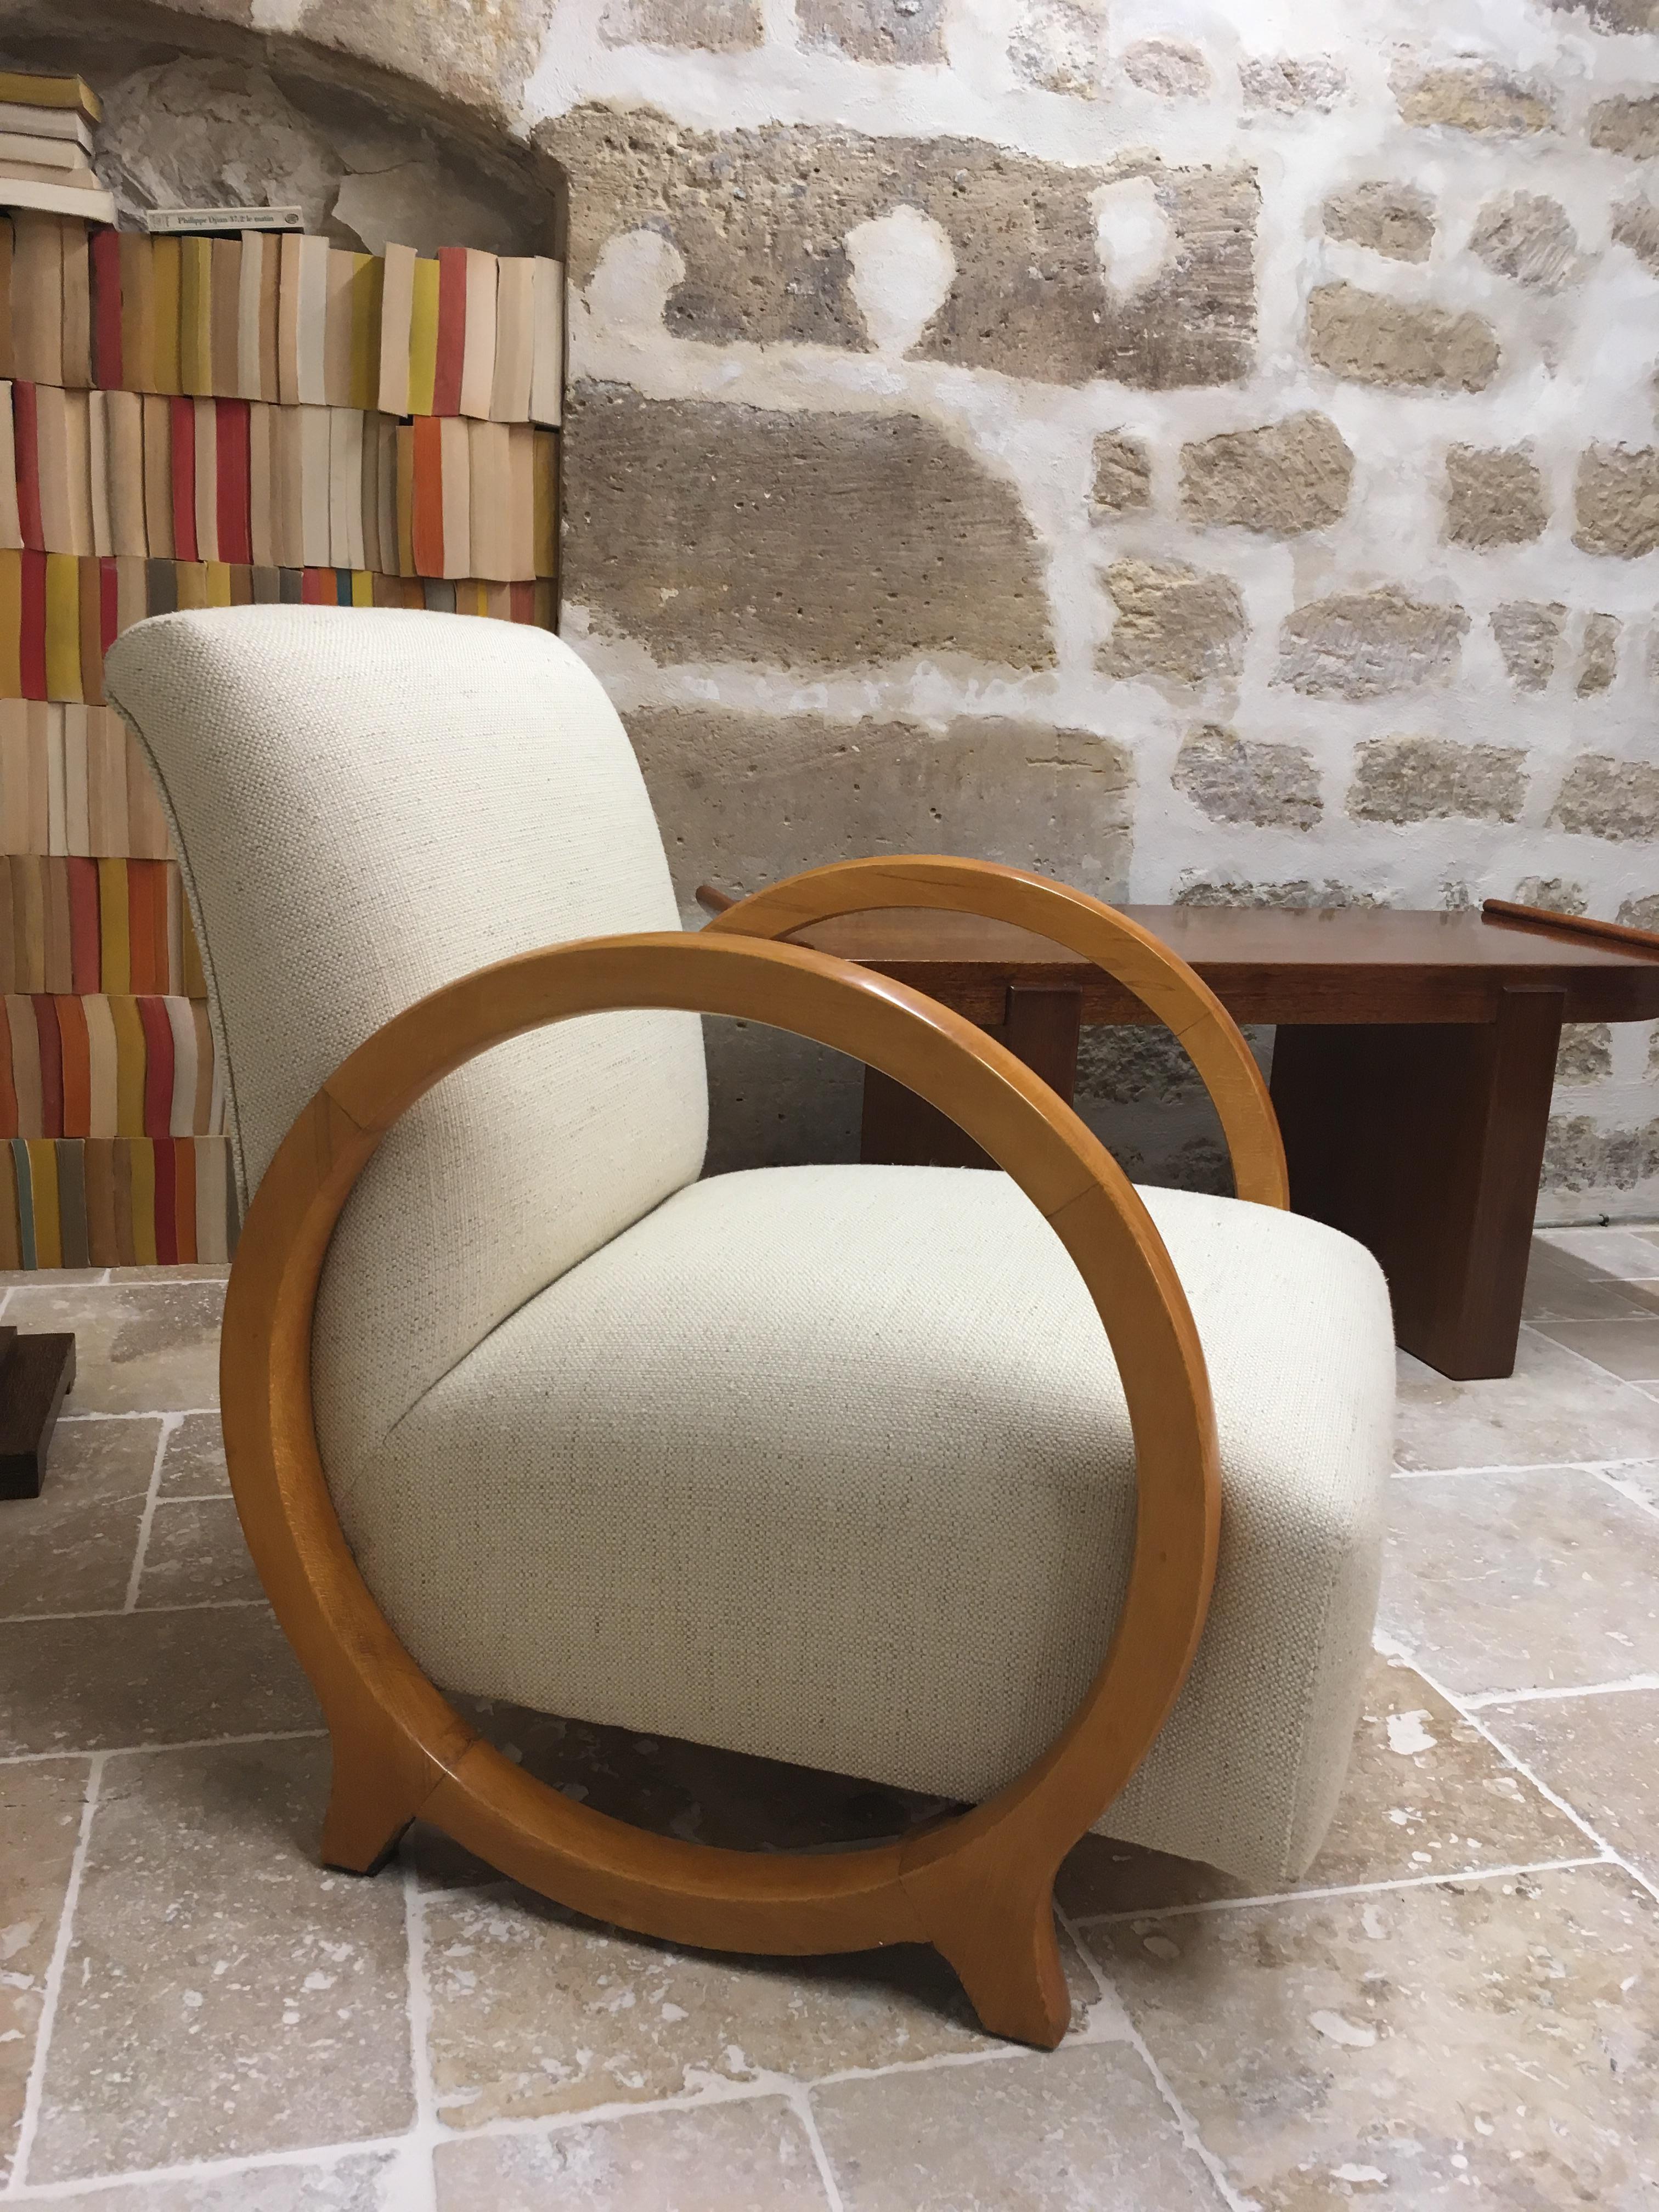 A rare modernistic armchair by great French designer of 20th century Jacques Adnet (1901-1984) for the Compagnie des Arts Français.
It made from tinted beechwood with two circular armrests forming the base.
The seats and backrests are covered with